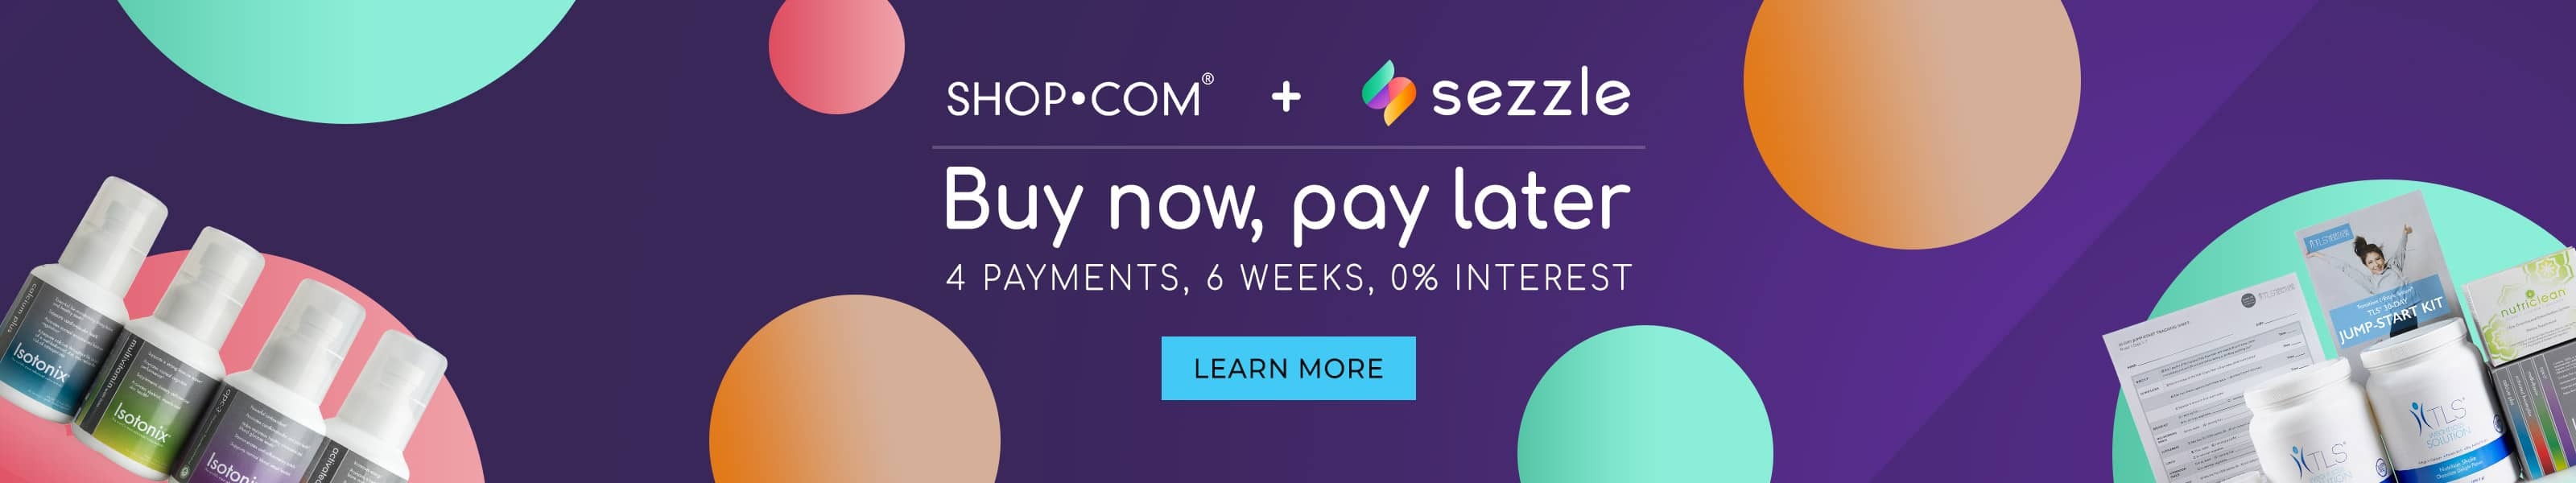 Sezzle - Buy now, pay later. 4 Payments, 6 Week, 0% Interest